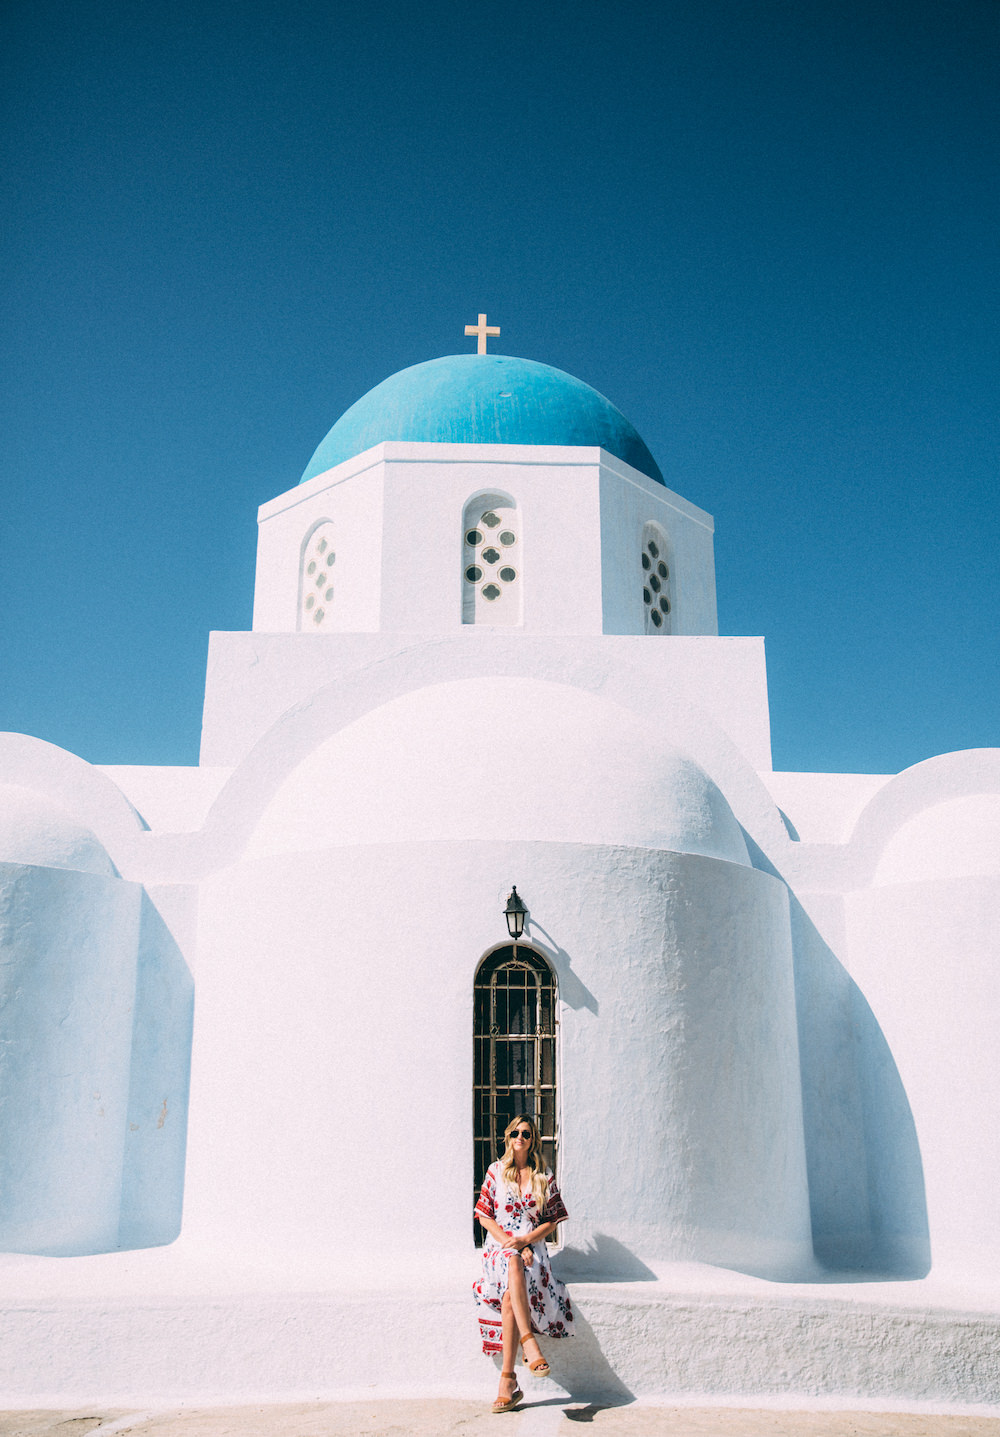 Dash of Darling shares her travels to Santorini, Greece with Royal Caribbean Cruises while wearing a Reverse dress from Revolve Clothing.